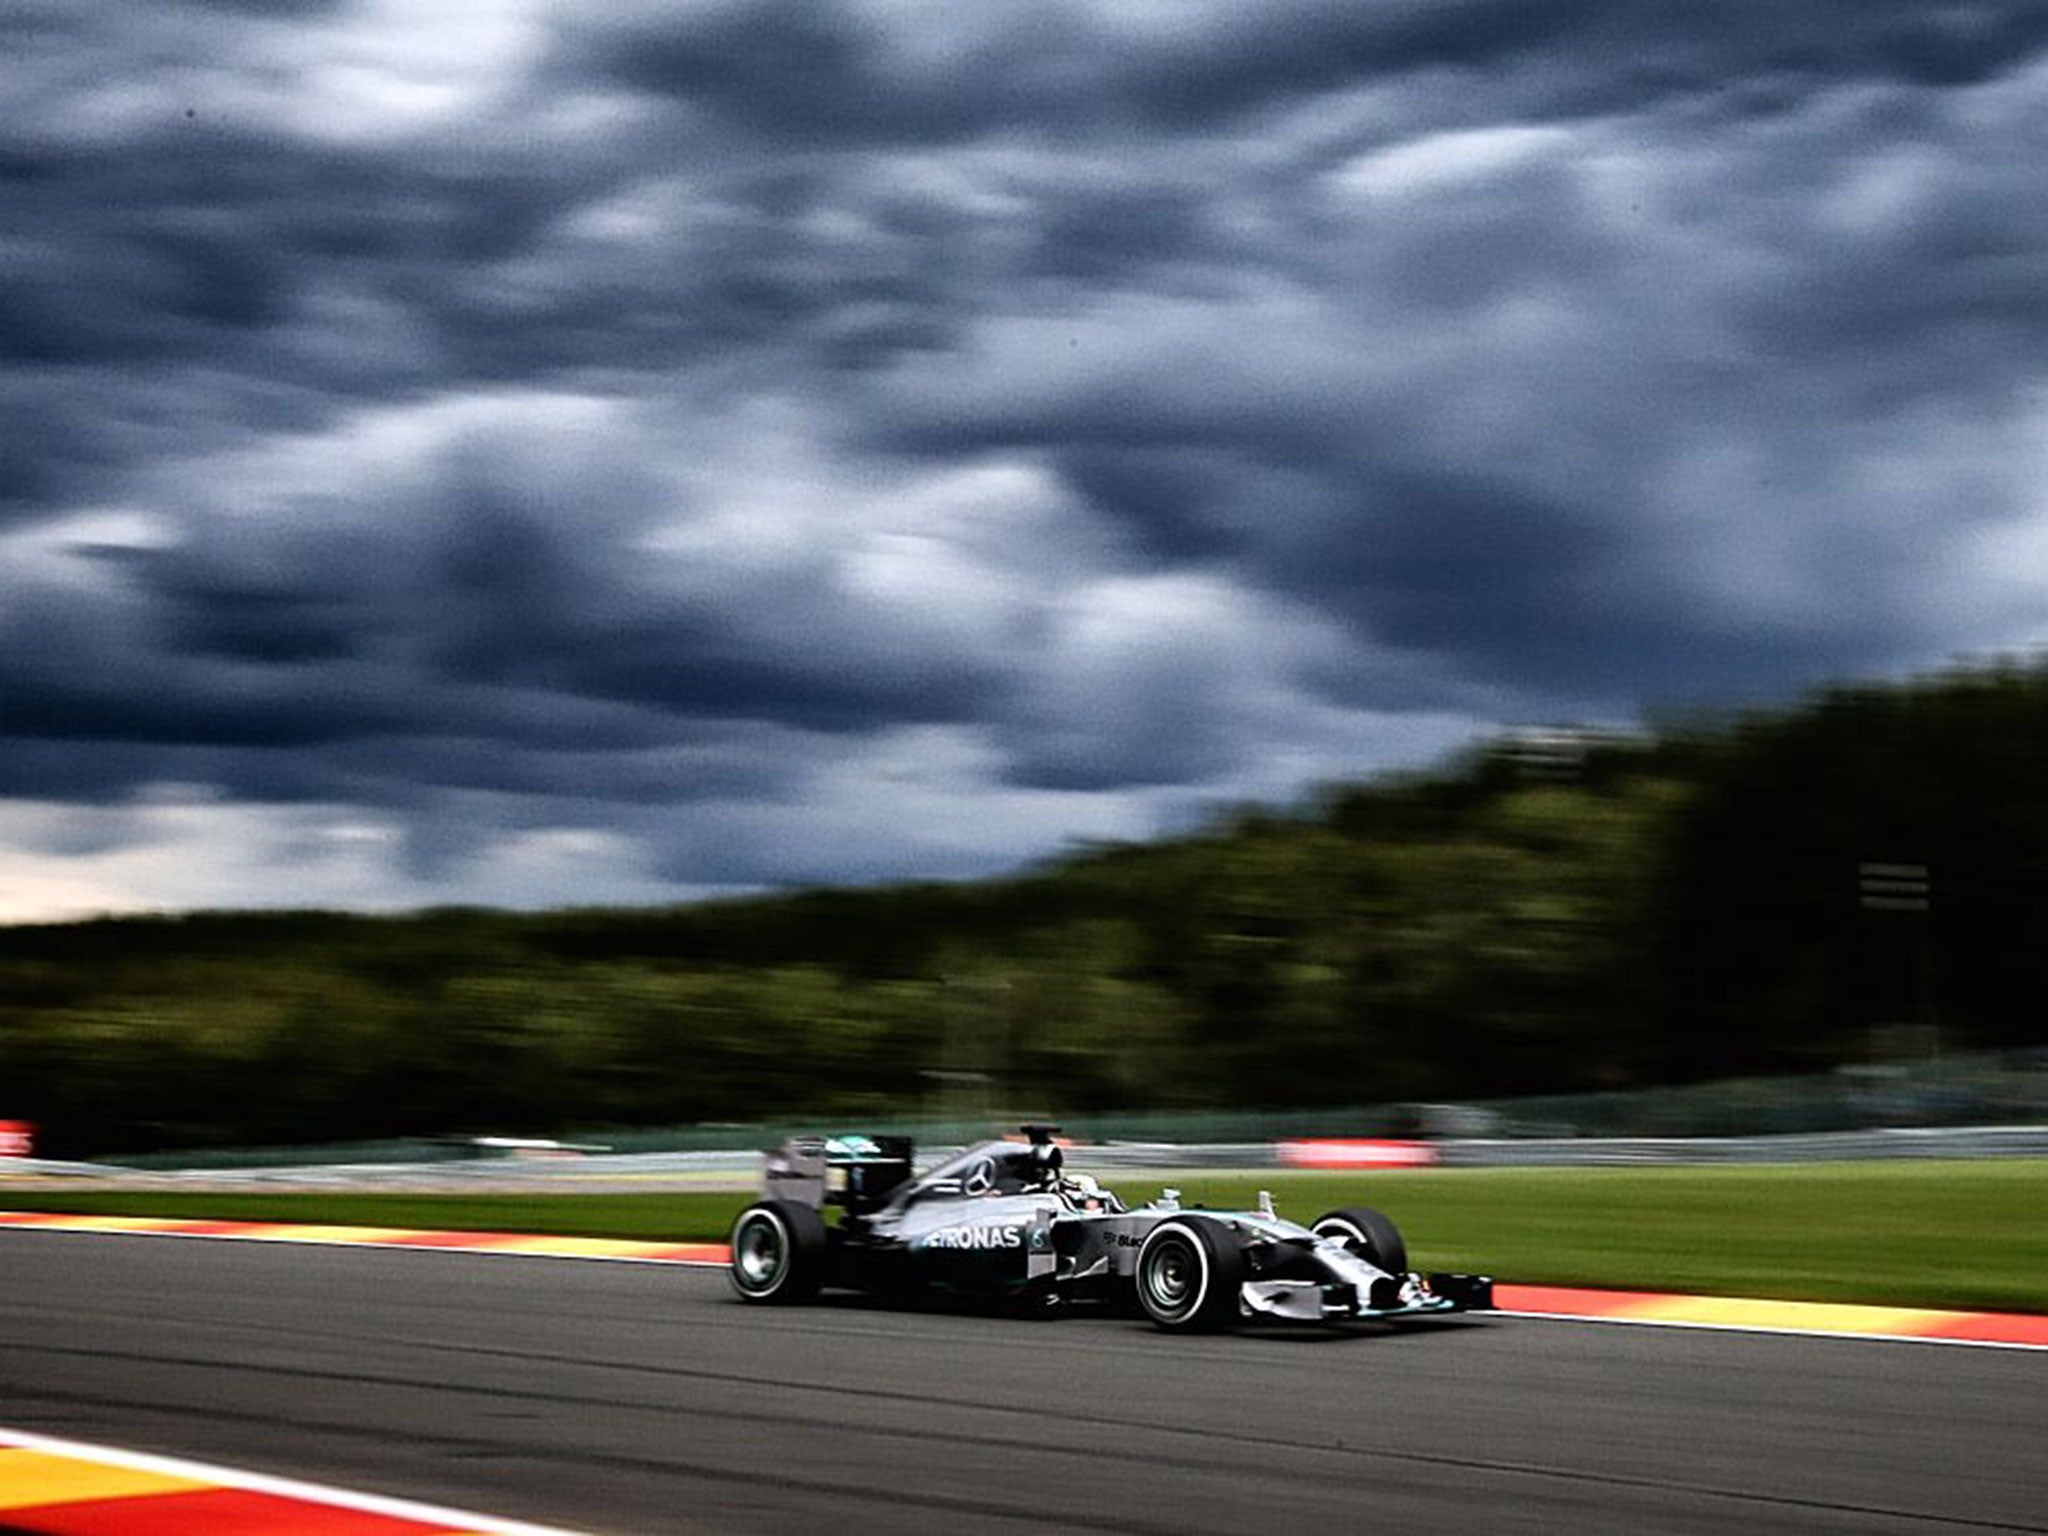 Mercedes’ Lewis Hamilton sets the pace in practice in Belgium as he eyes success on Sunday